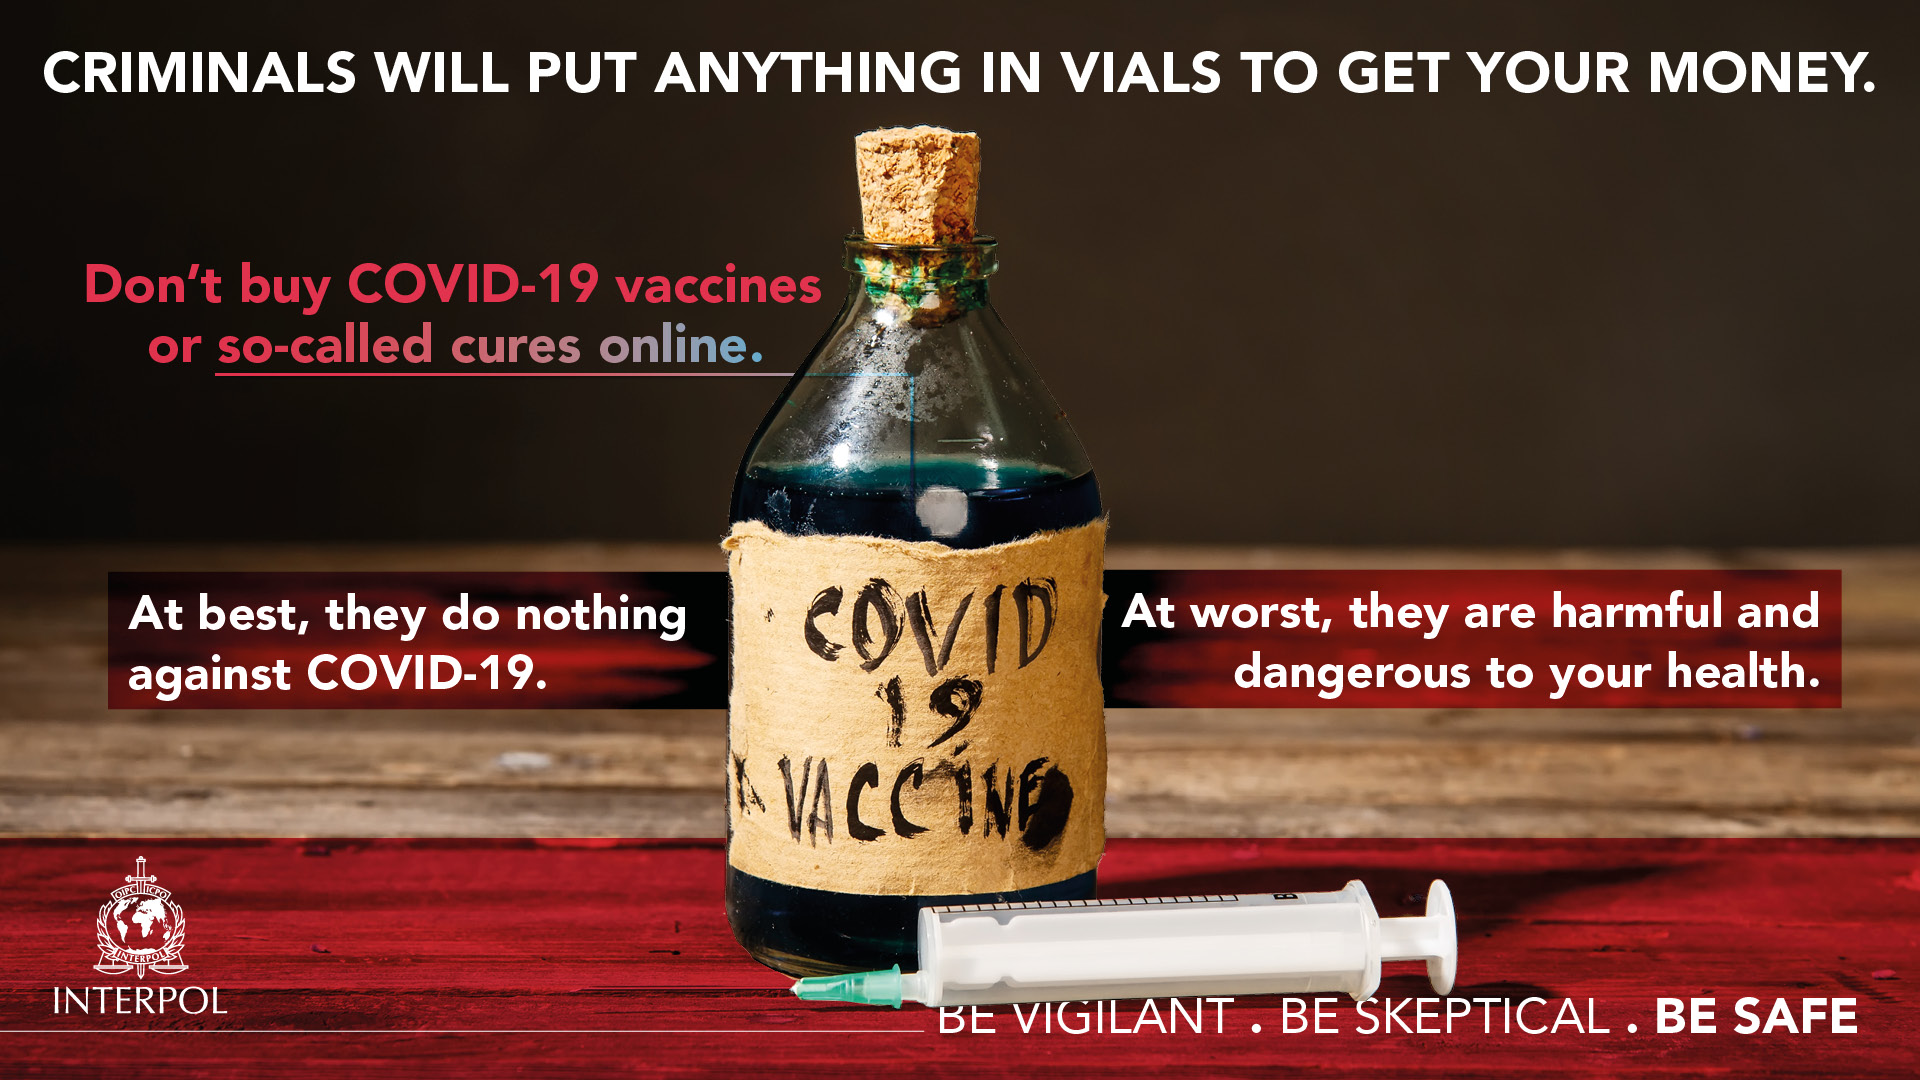 Criminals will put anything in vials to get your money. Don't buy COVID-19 vaccines or so-called cures online. At best, they do nothing against COVID-19. At worst, they are harmful and dangerous to your health.